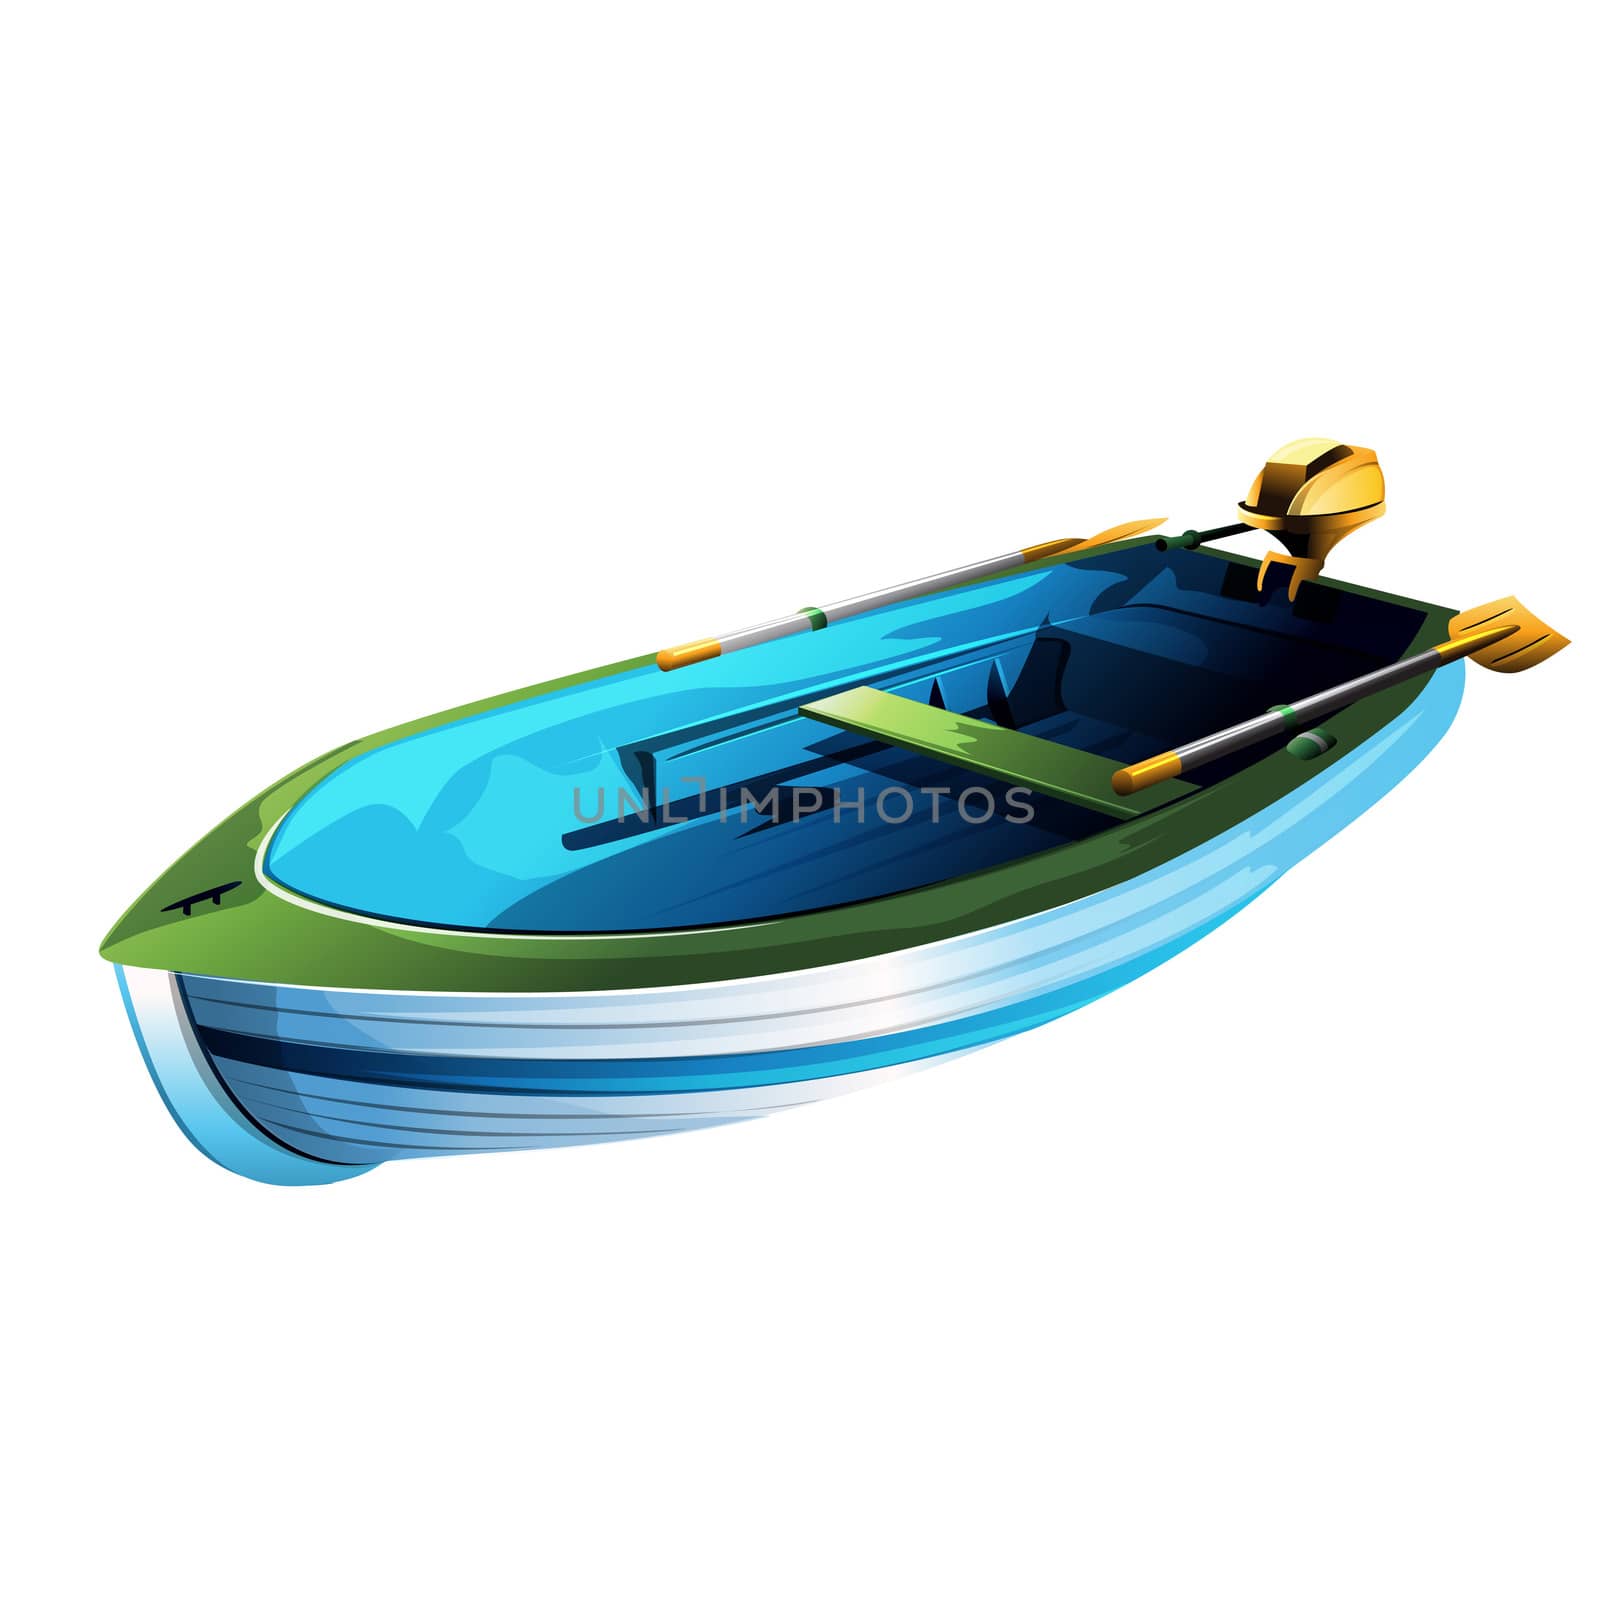 Rowing boat illustration on a white background